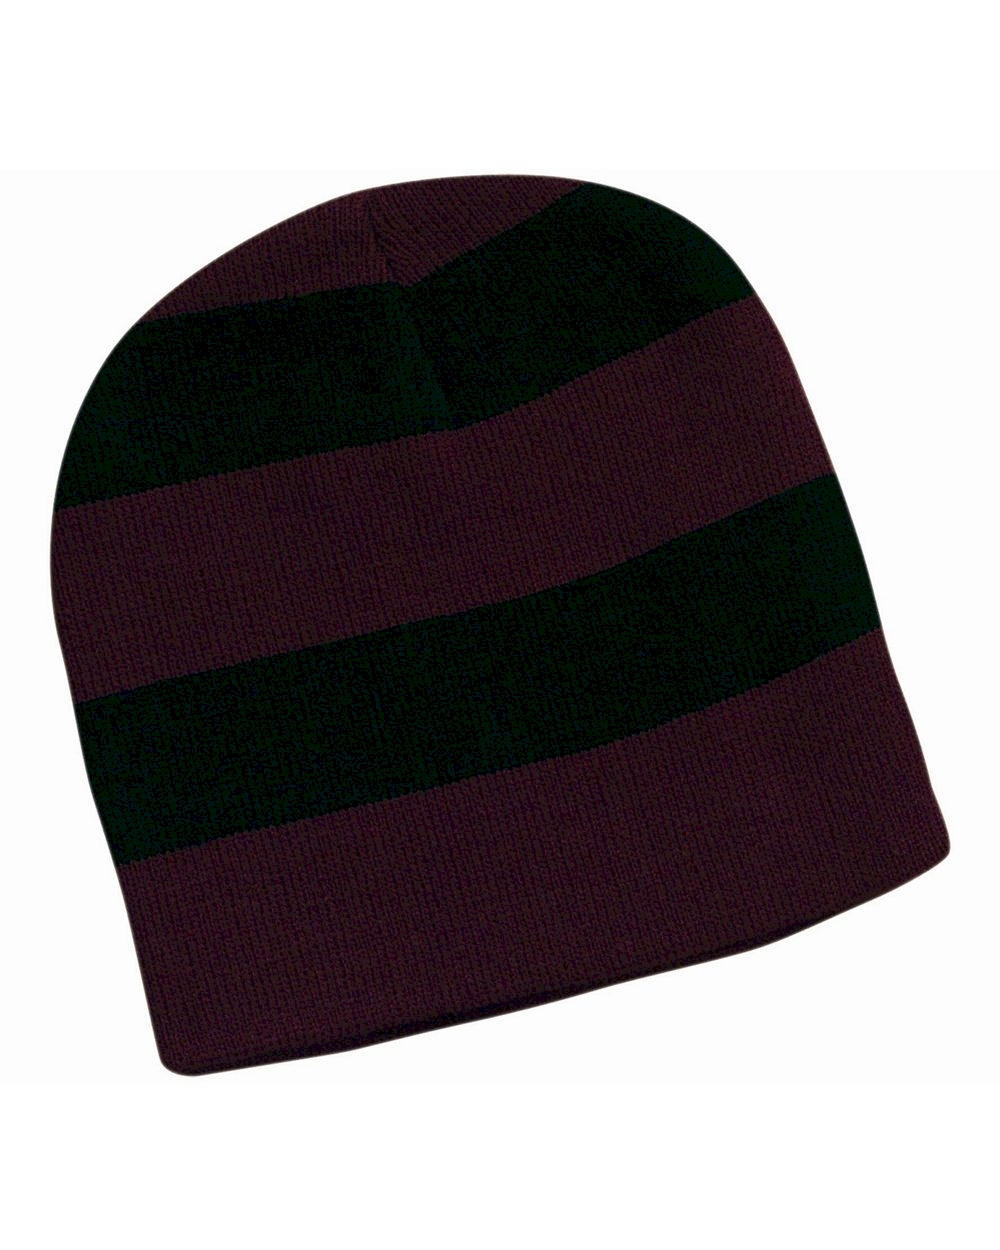 Rugby Striped Knit Beanie Embroidery Blanks - Maroon/Black